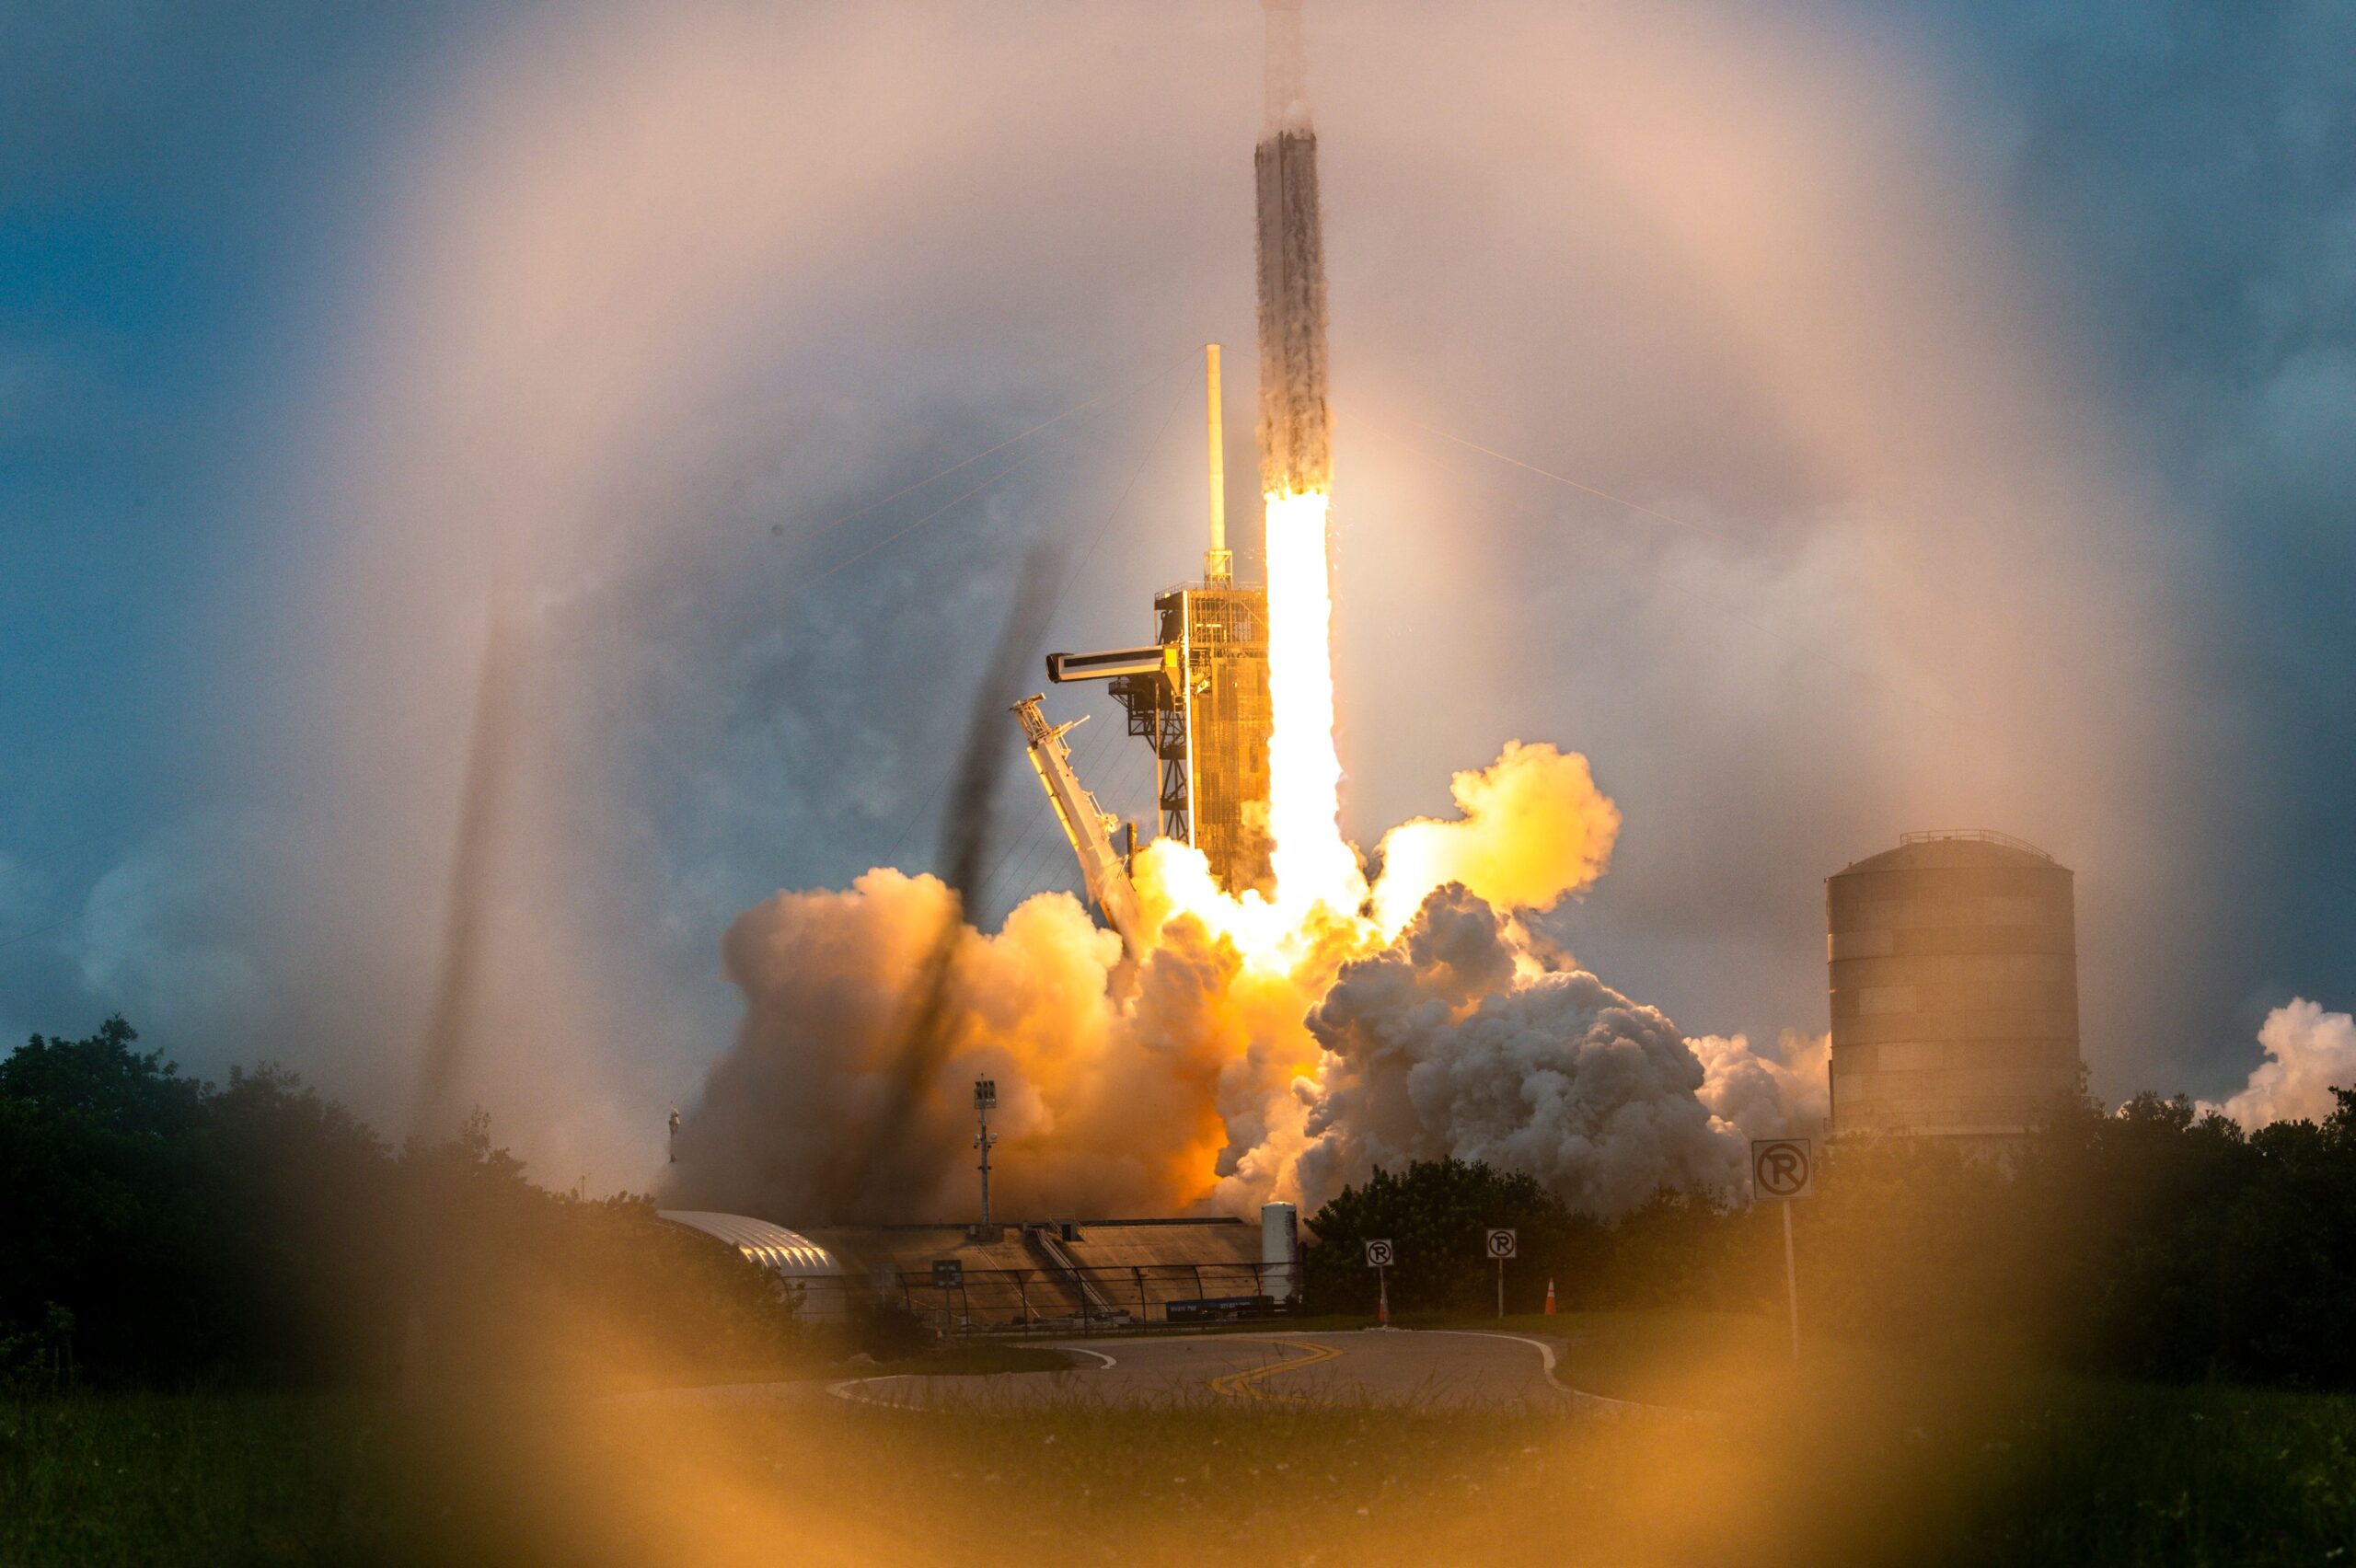 SpaceX's Bold Move: Seeking Top Sales Experts for Private Space Travel Adventure